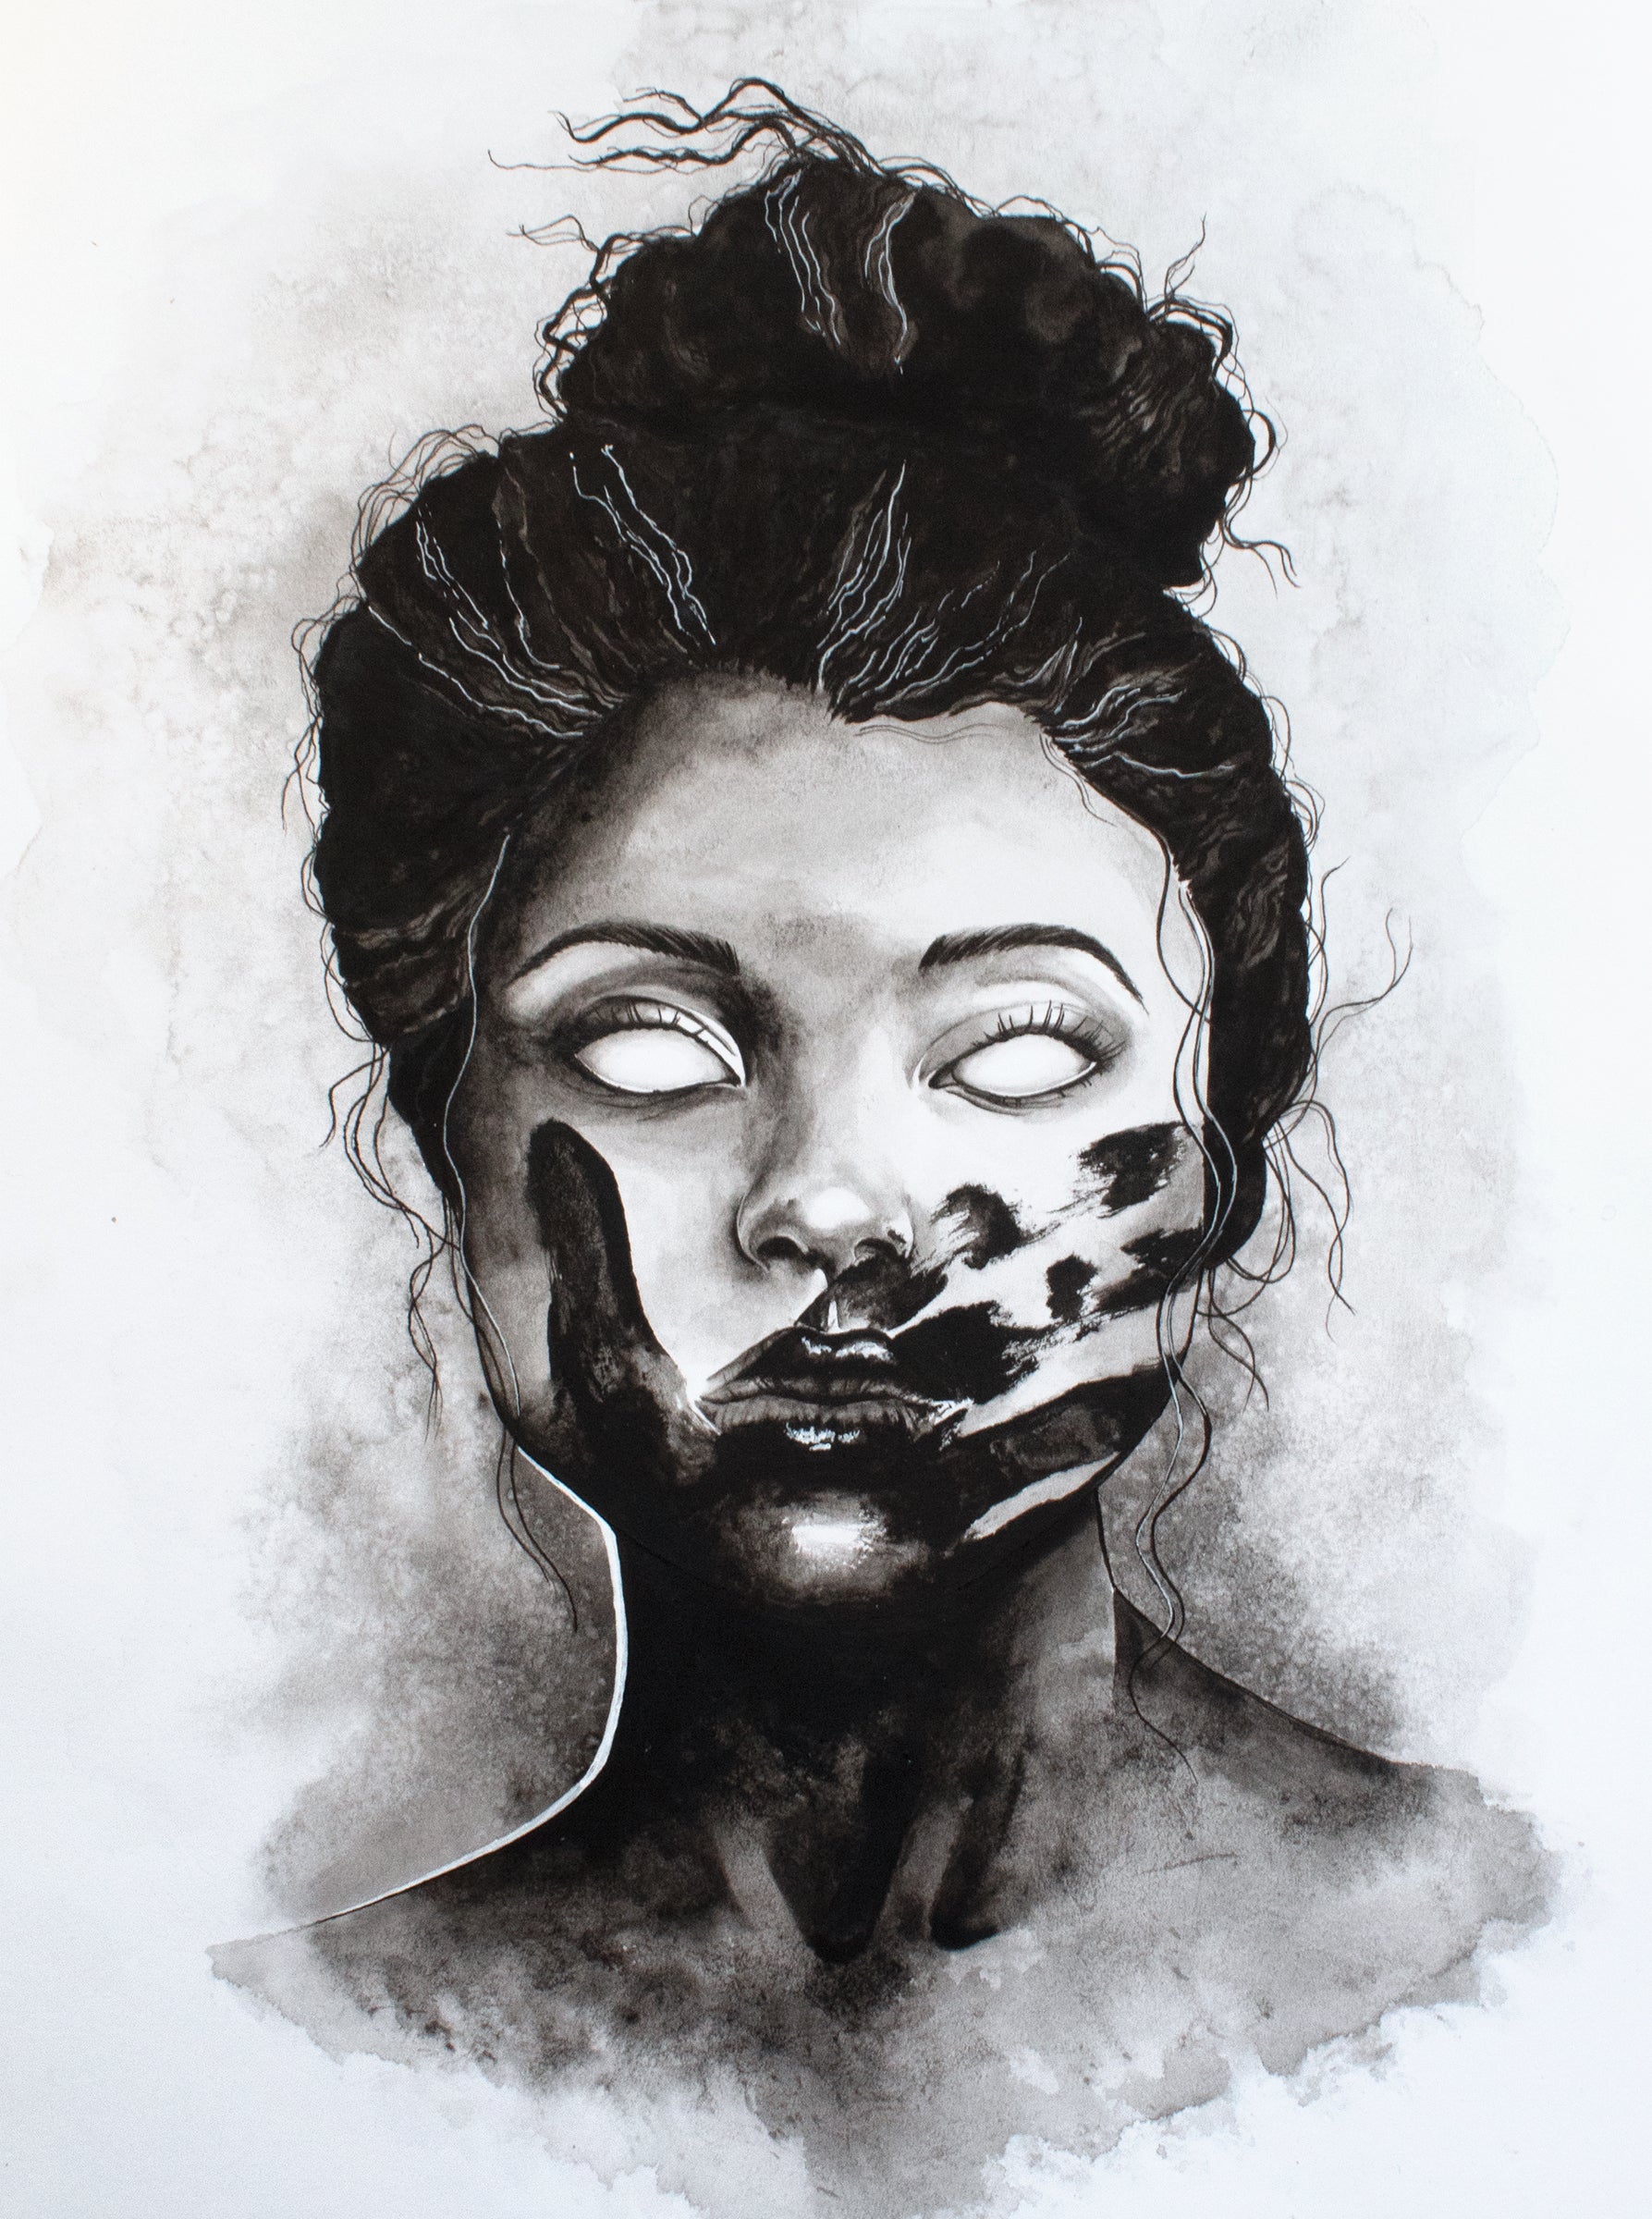 A black and white watercolor painting of a woman with a large handprint over the lower half of her face